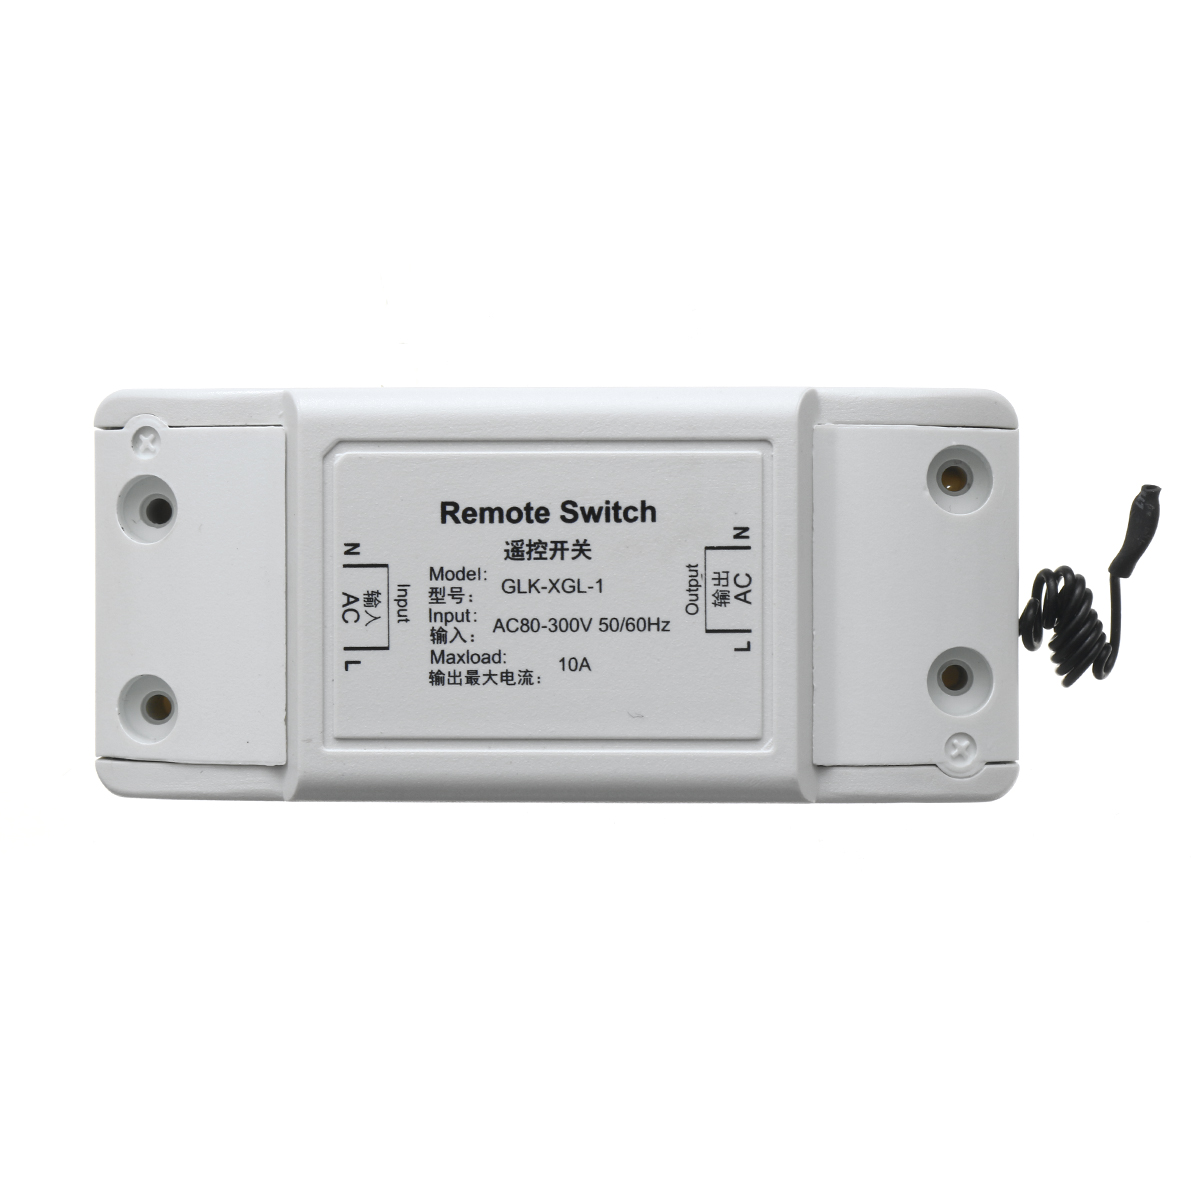 12Way-Lamp-Light-Wireless-Remote-Control-Switch-Receiver-Transmitter-ONOFF-Switch-Controller-1304488-6